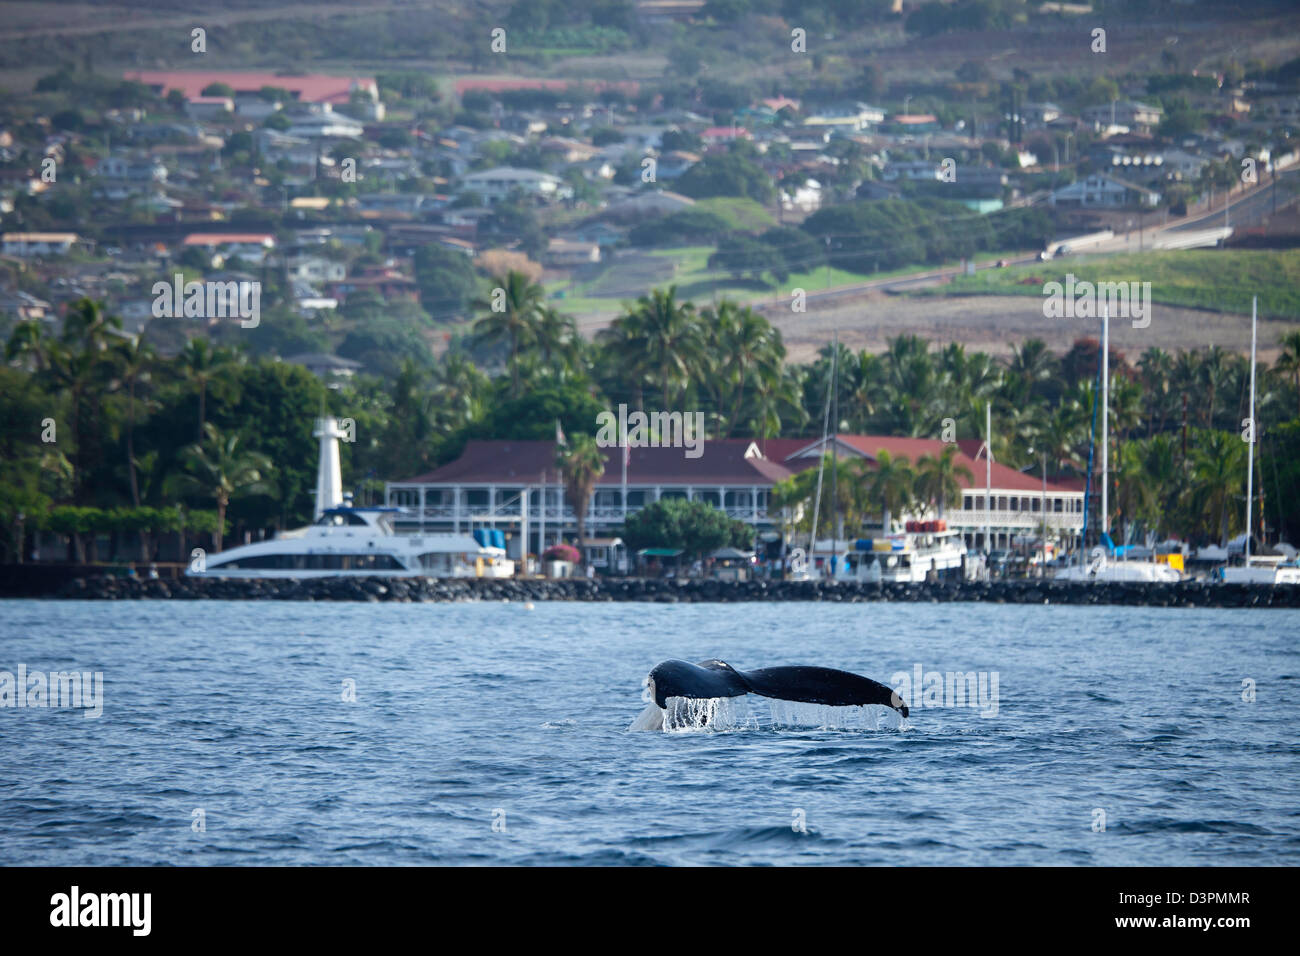 A humpback whale, Megaptera novaeangliae, lifts it's tail in front of Lahaina Harbor and the famous Pioneer Inn on Maui, Hawaii. Stock Photo